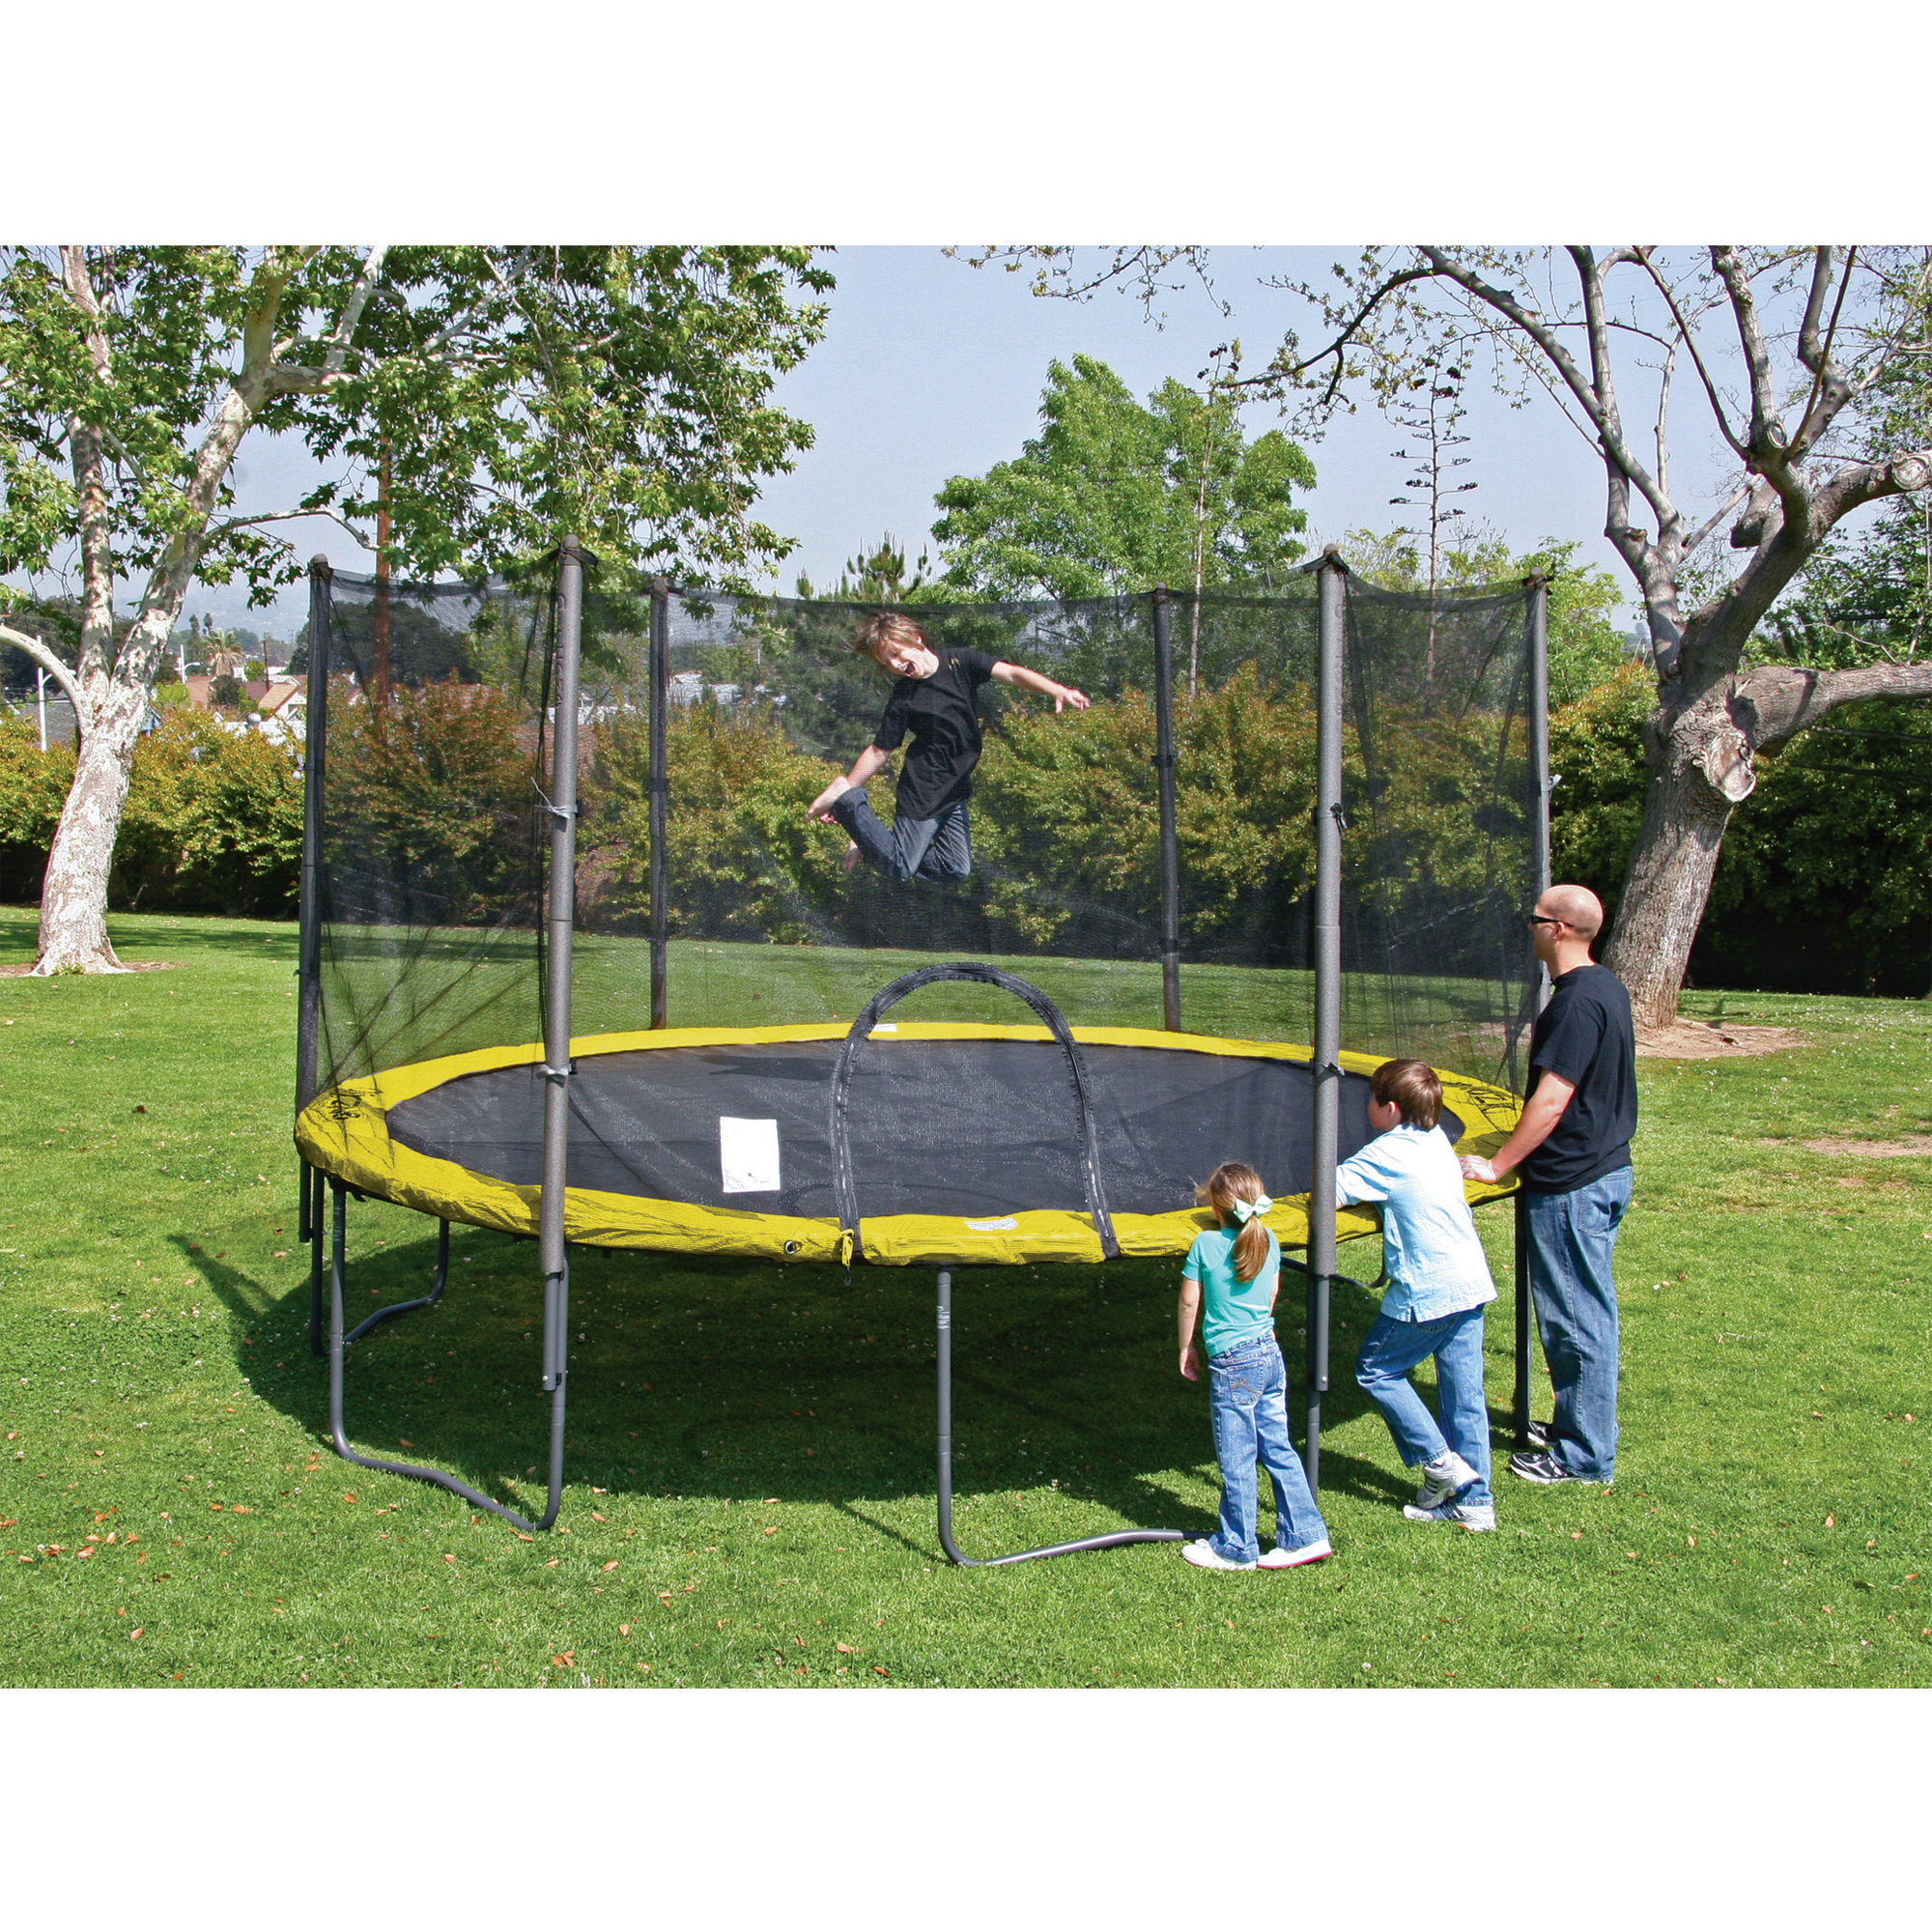 AirZone 14ft. Trampoline with Enclosure — Fun = Safety | Northern Tool